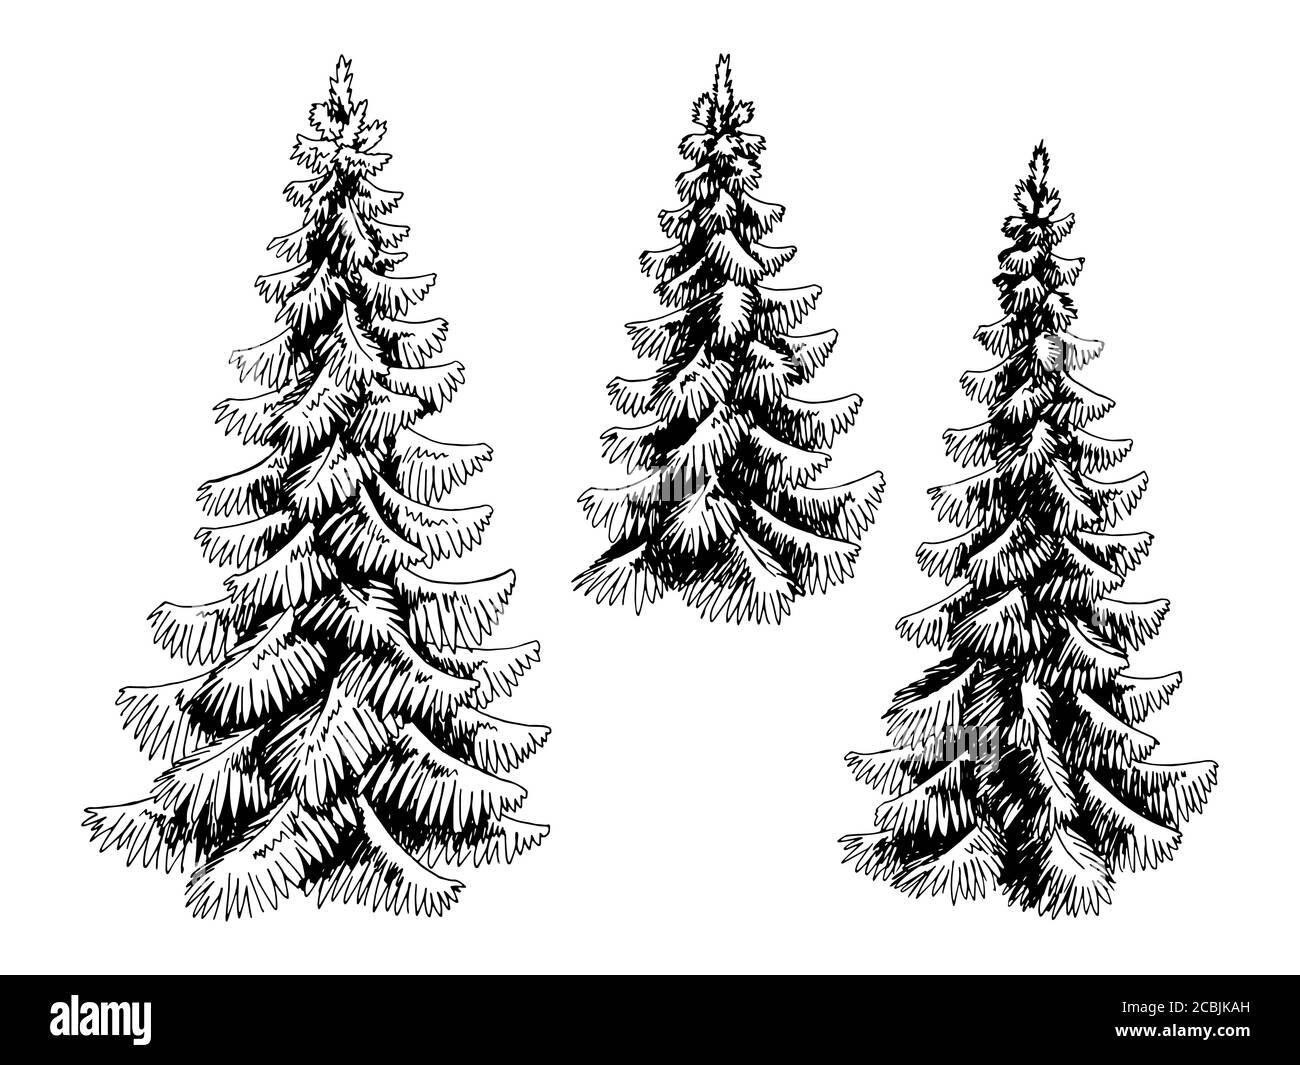 Fir tree set spruce graphic black white isolated sketch illustration vector Stock Vector